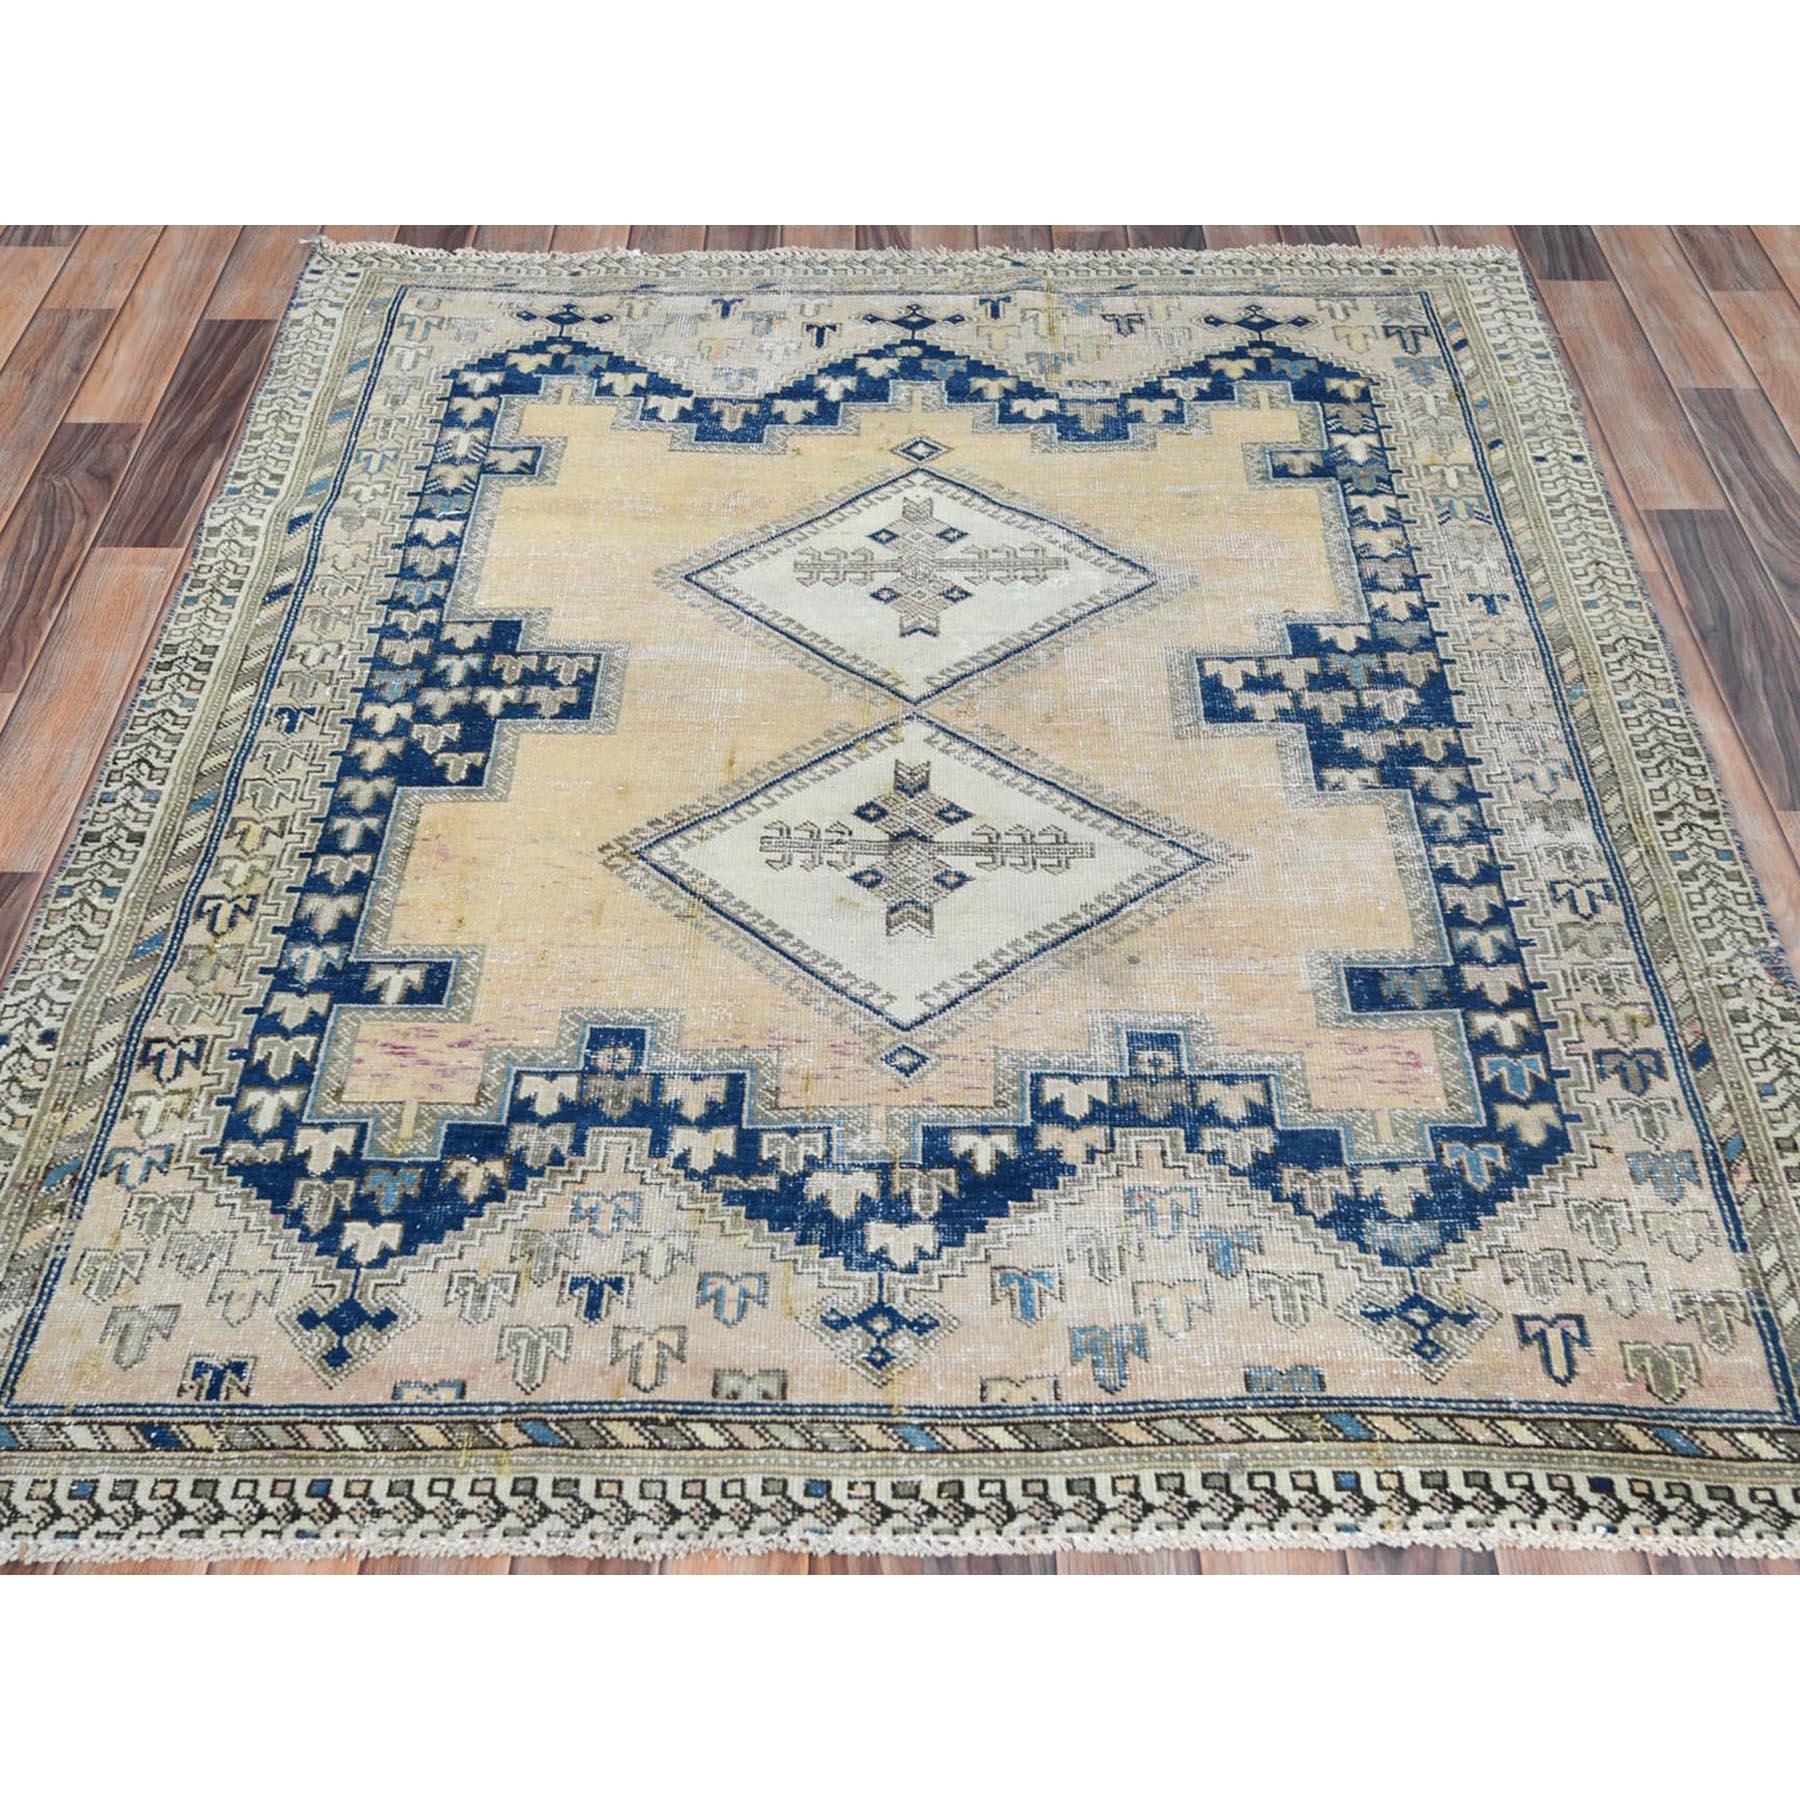 This fabulous Hand-Knotted carpet has been created and designed for extra strength and durability. This rug has been handcrafted for weeks in the traditional method that is used to make
Exact rug size in feet and inches : 4'9